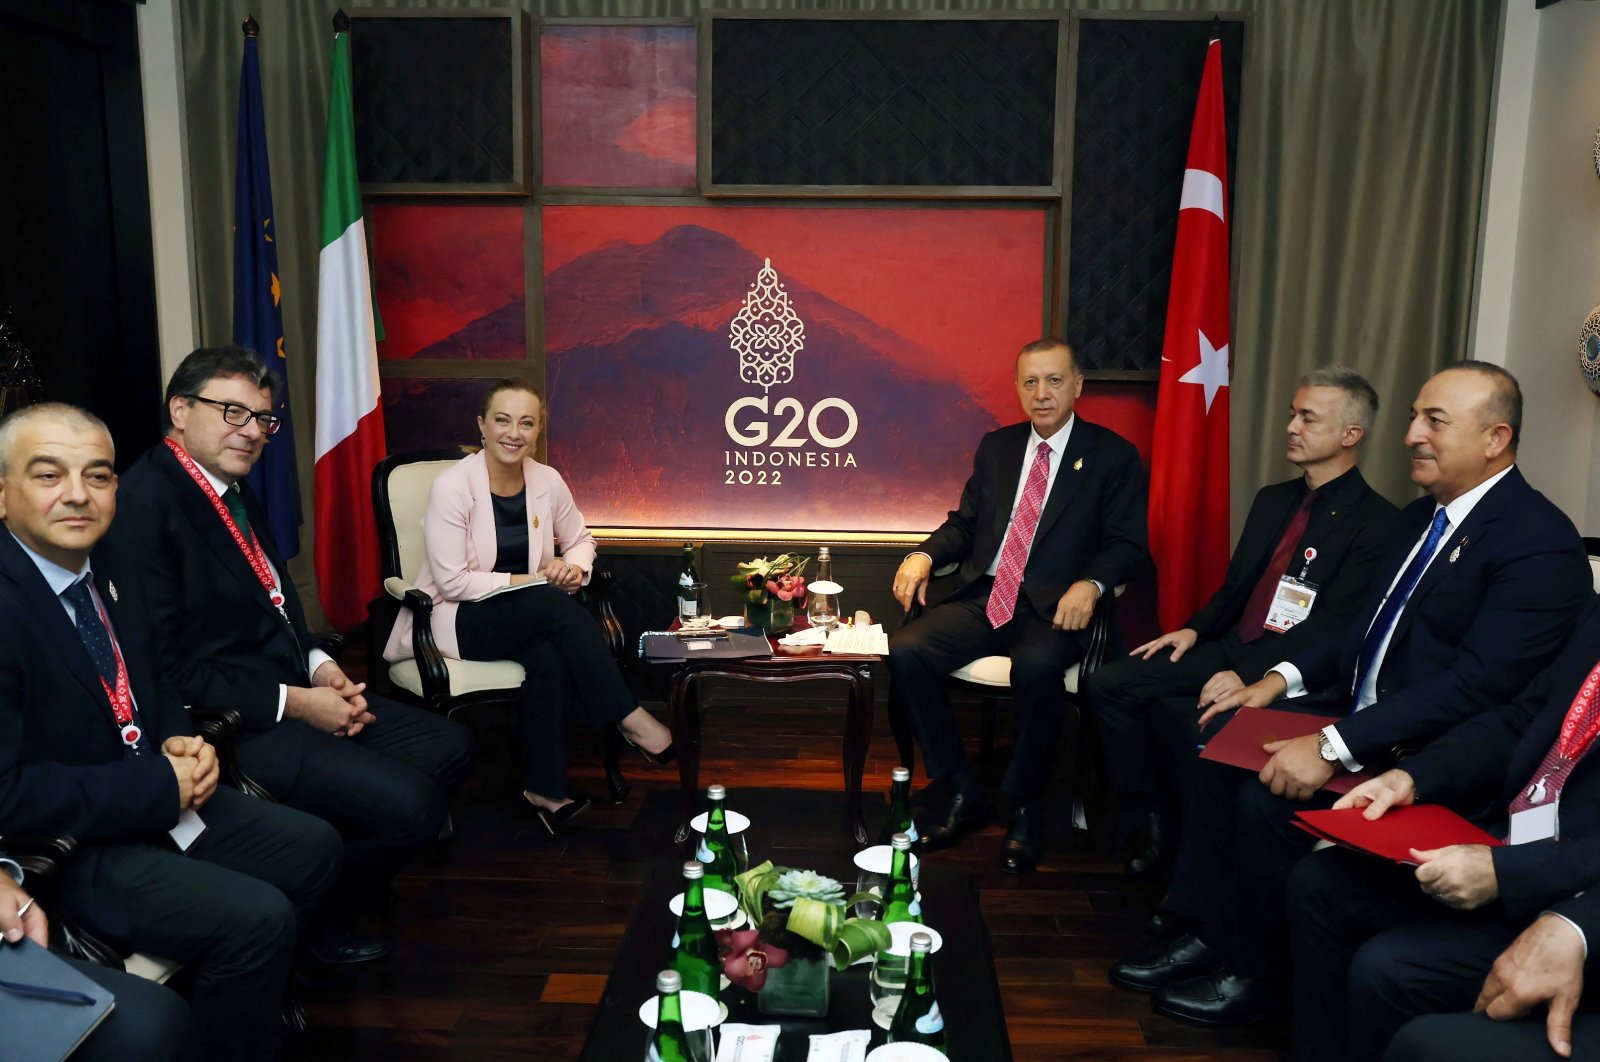 President Recep Tayyip Erdoğan and Prime Minister of Italia Giorgia Meloni (C, L) posing with their delegations prior to their meeting as part of the G-20 leaders&#039; summit in Indonesia, Nov. 15, 2022. (AFP Photo)